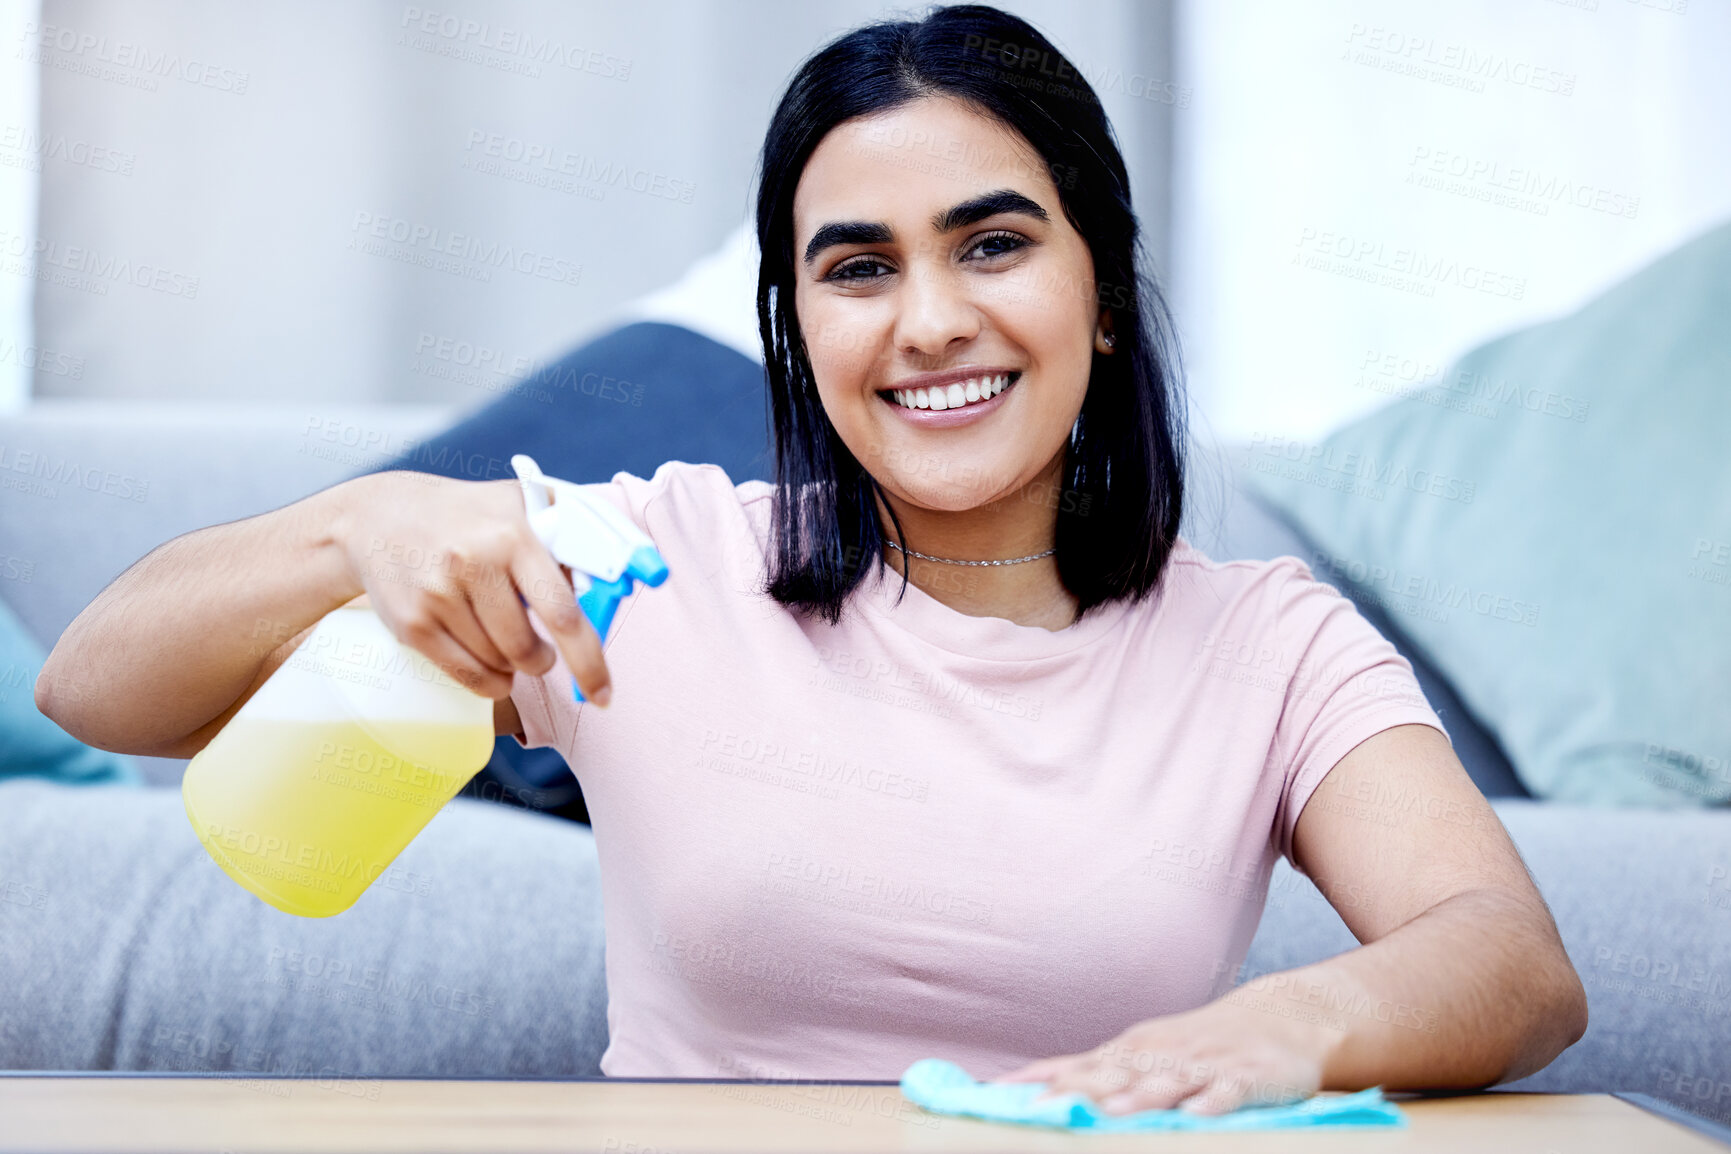 Buy stock photo Shot of a young woman cleaning a table at home